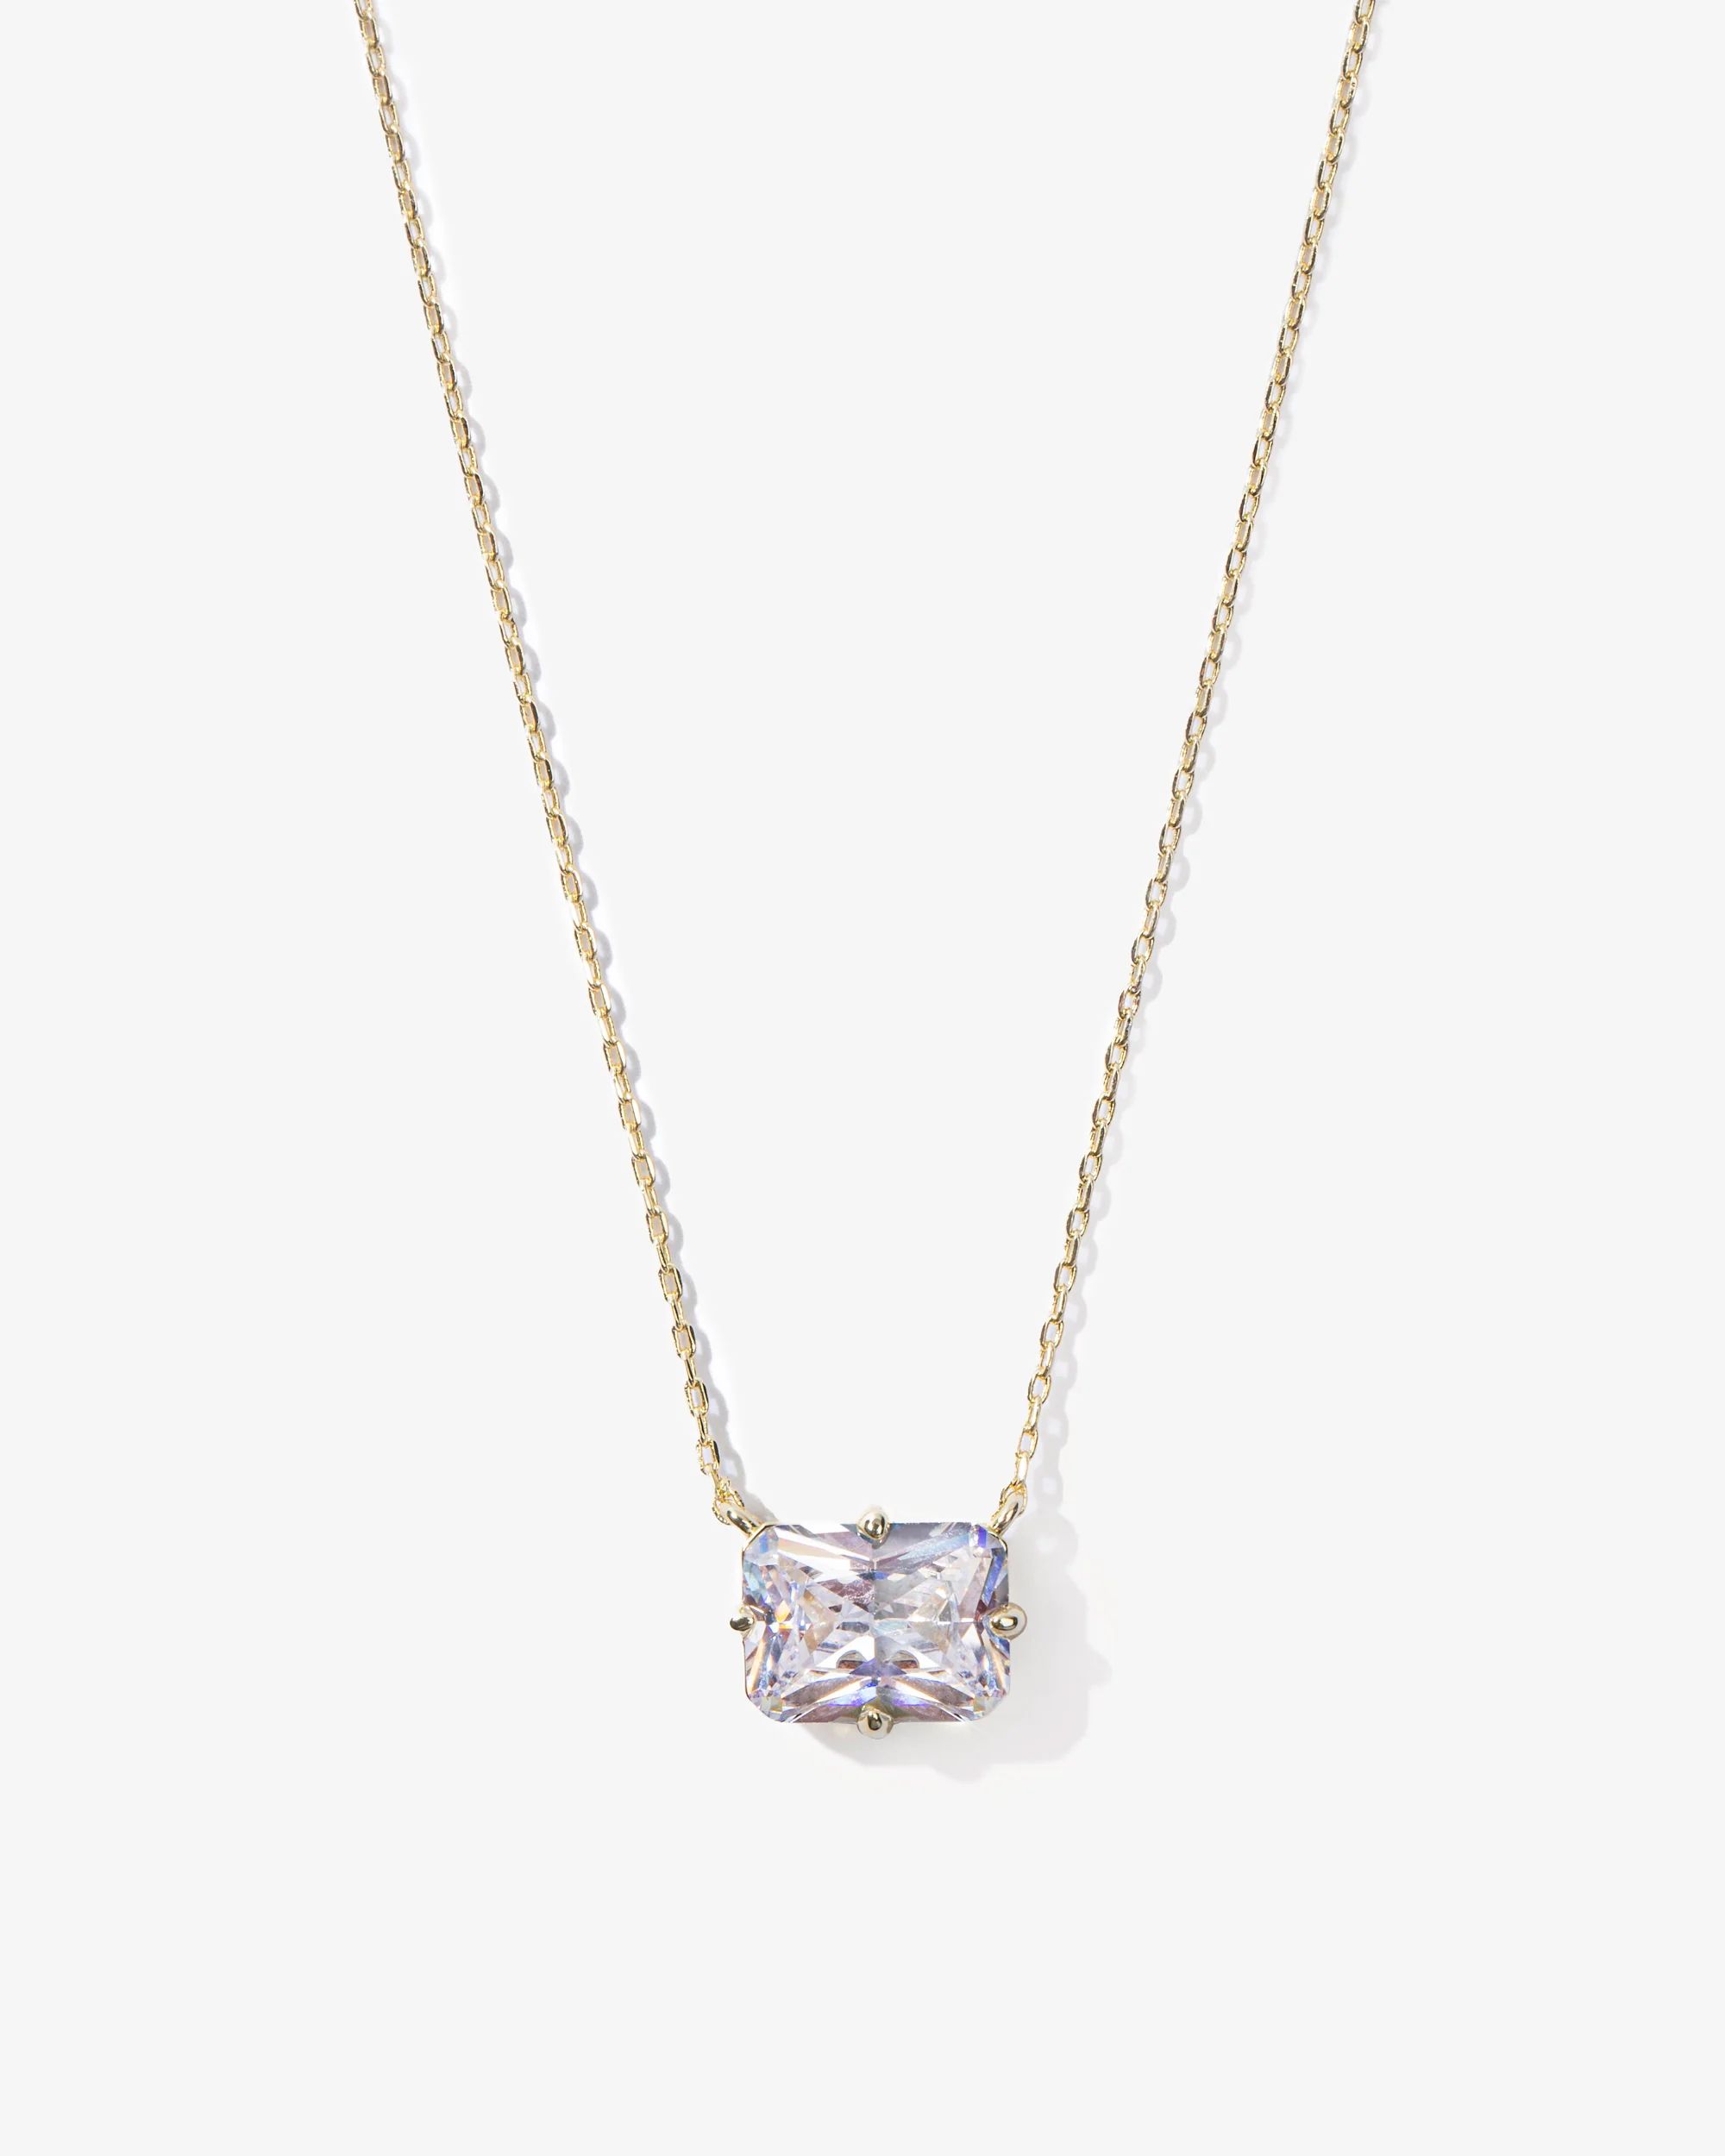 Your Highness Necklace | Melinda Maria